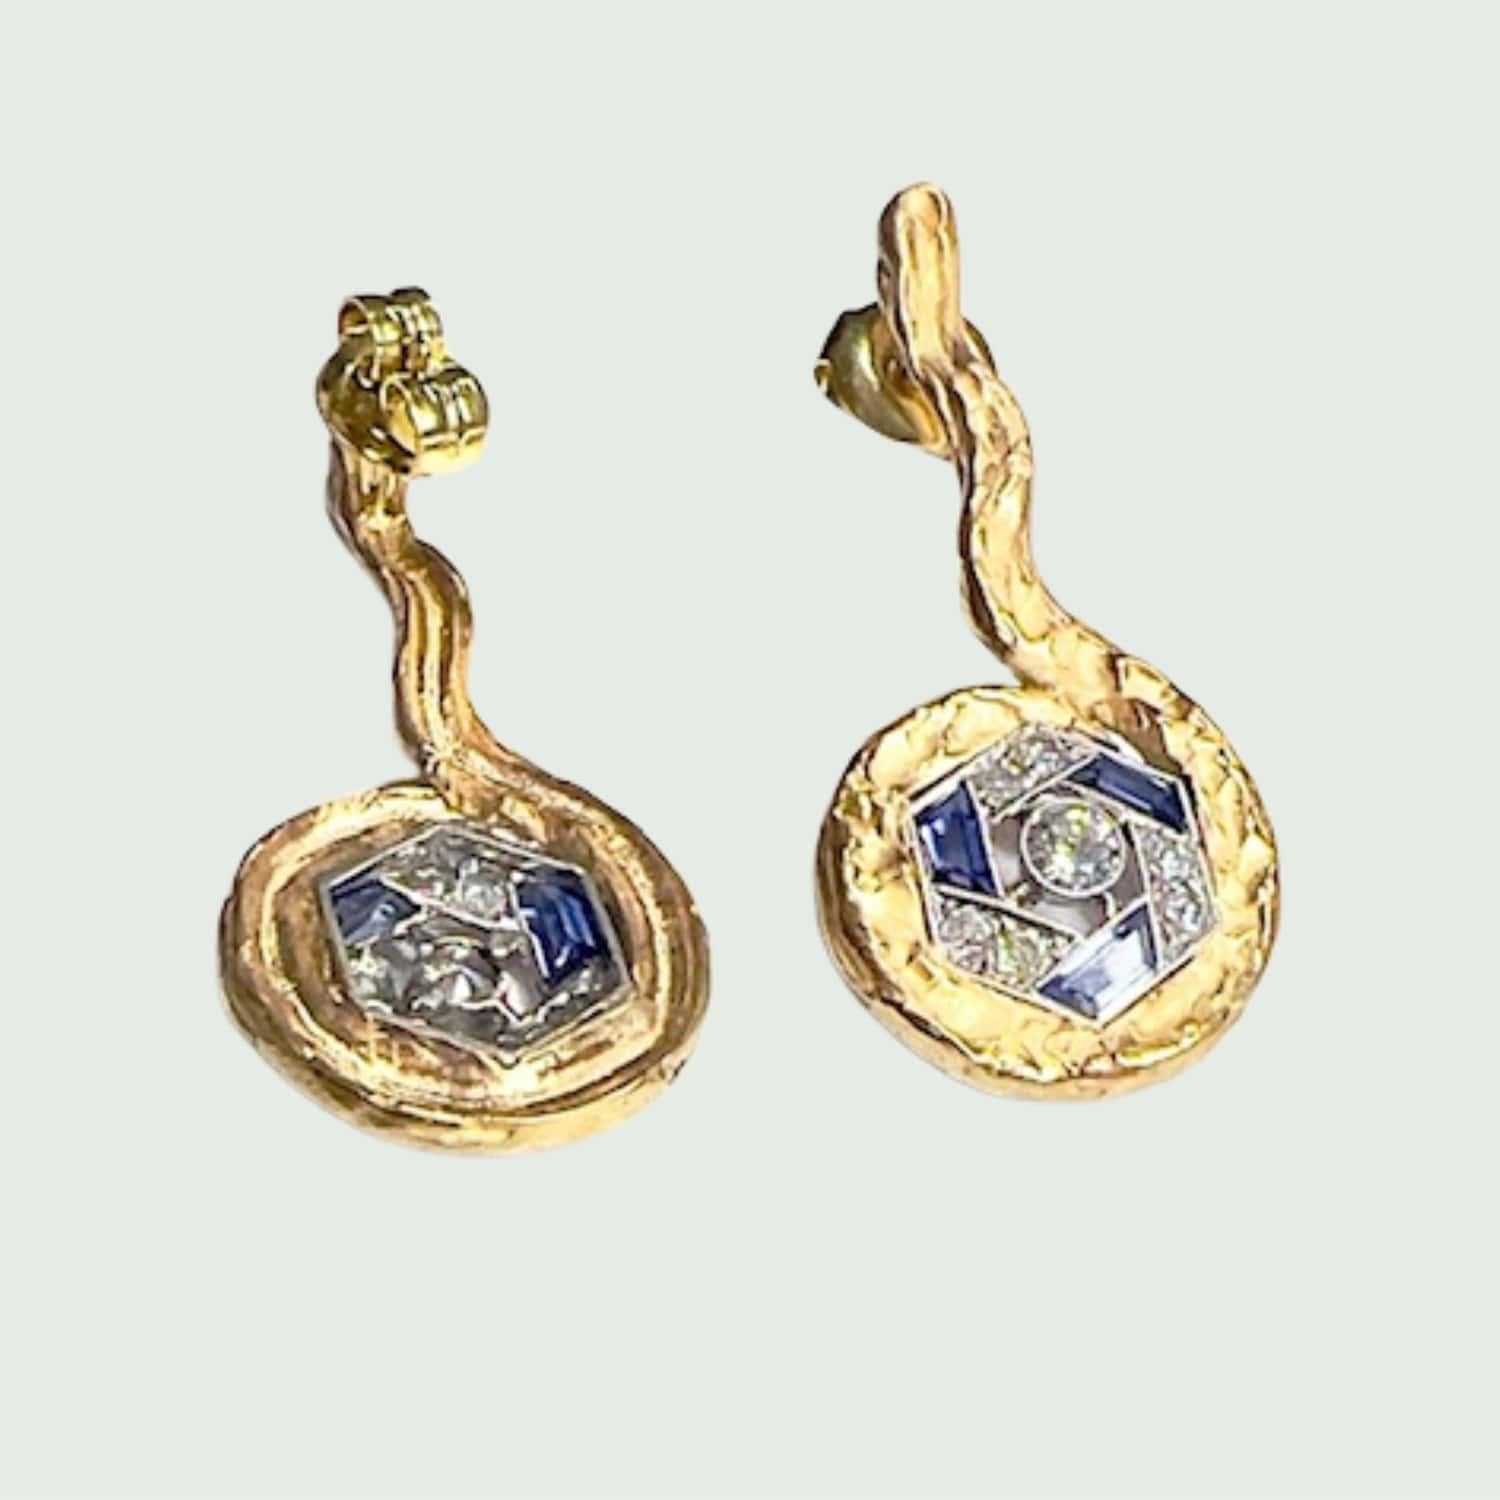 These stunning earrings boast an Art Deco design, crafted in 18k gold with platinum 950 kts accents. They feature antique and single-cut diamonds totaling 1 carat, along with trapezoid-cut sapphires, exuding timeless elegance.

** IN